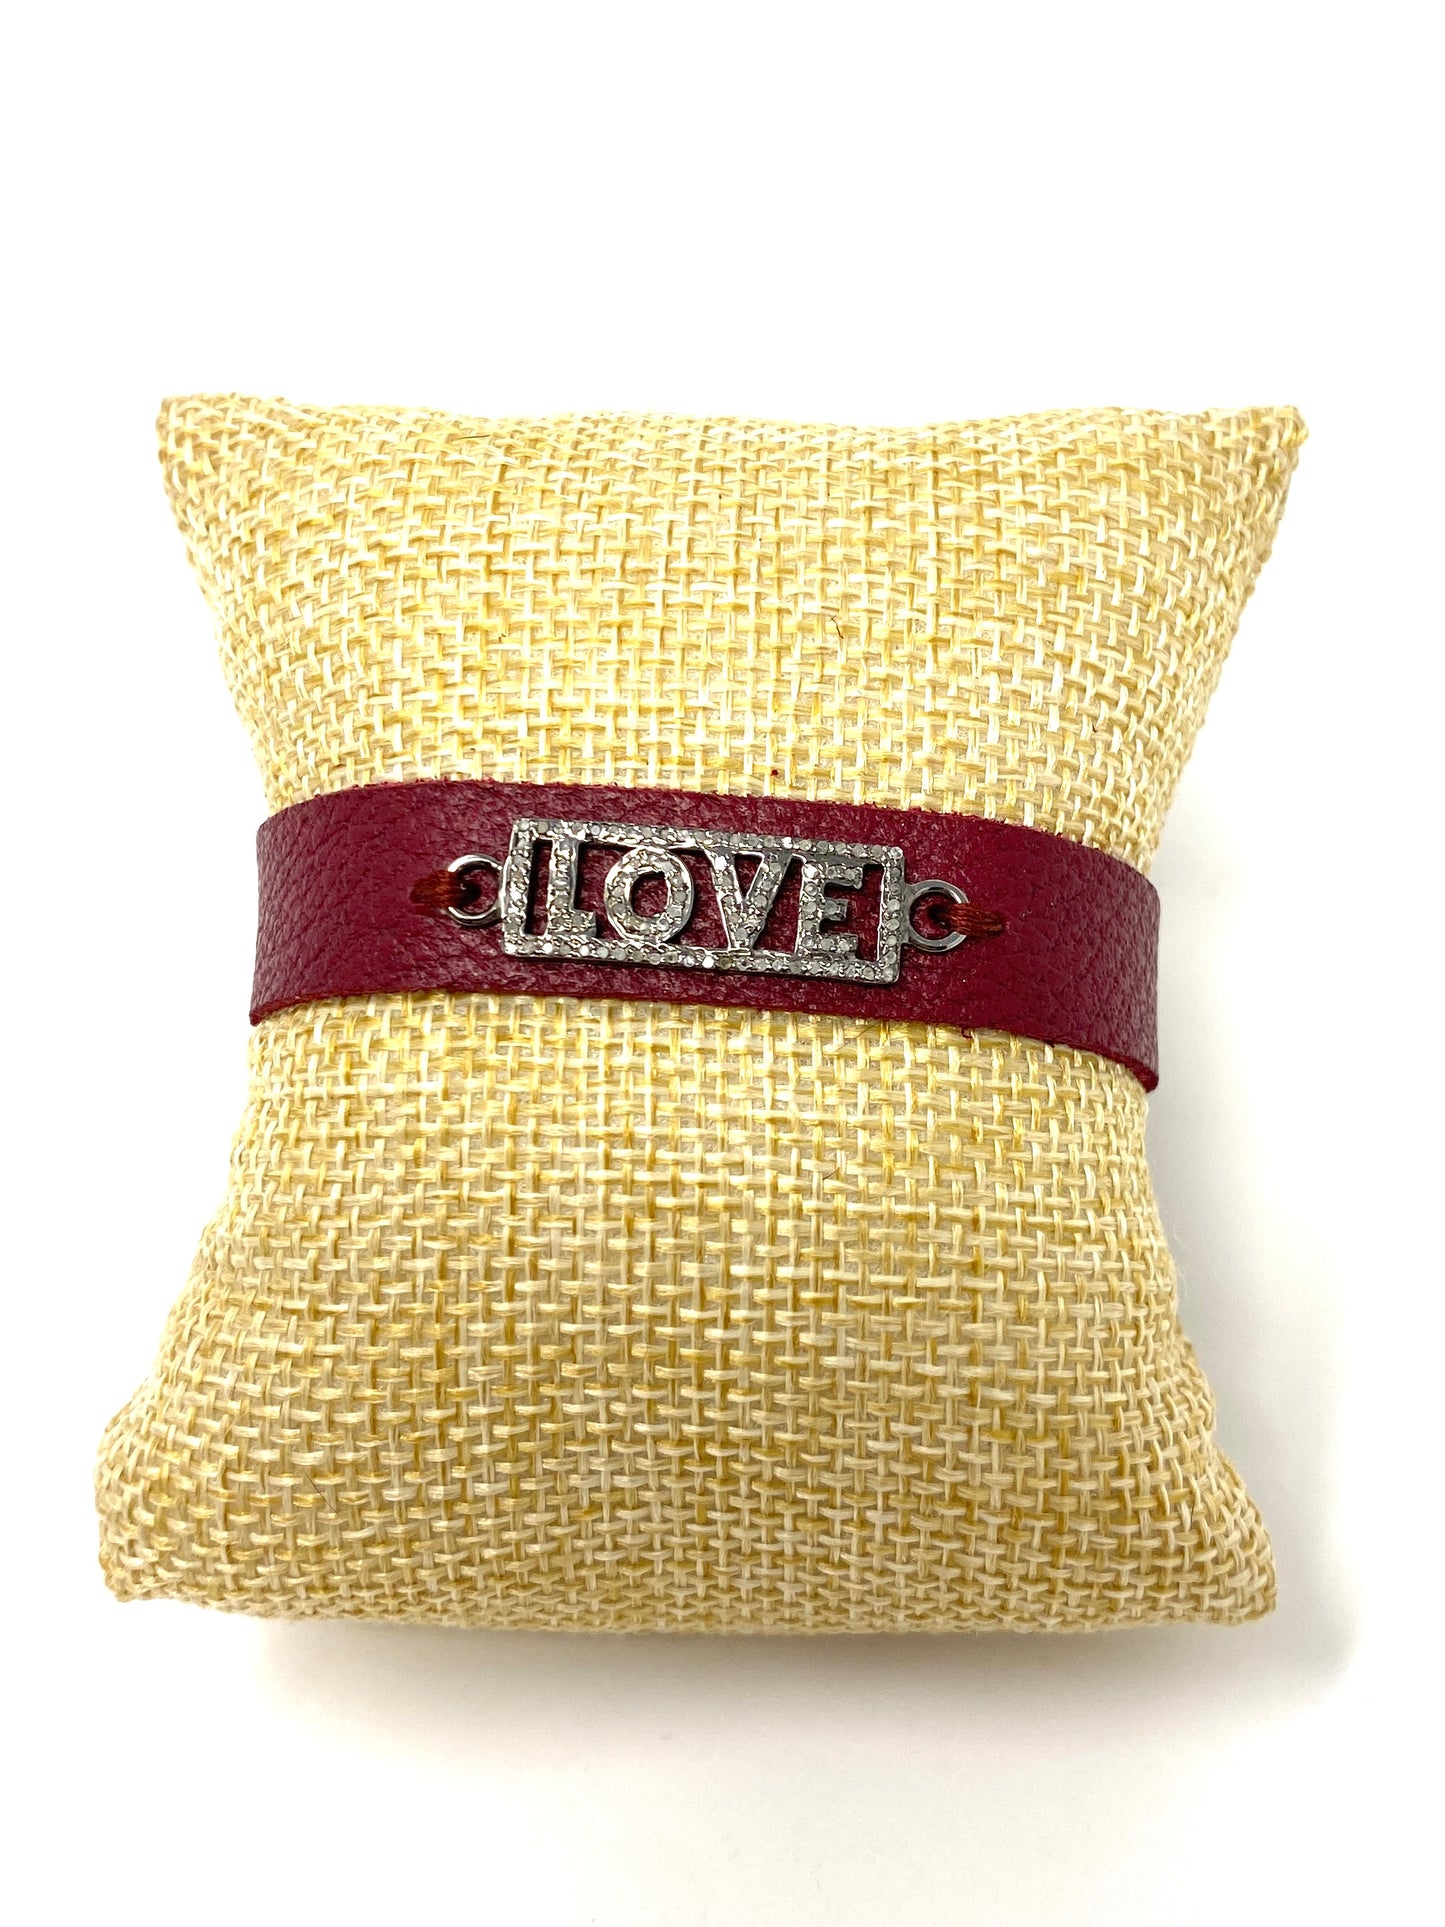 Maroon Leather Cuff Bracelet With Diamond "Love" Connector